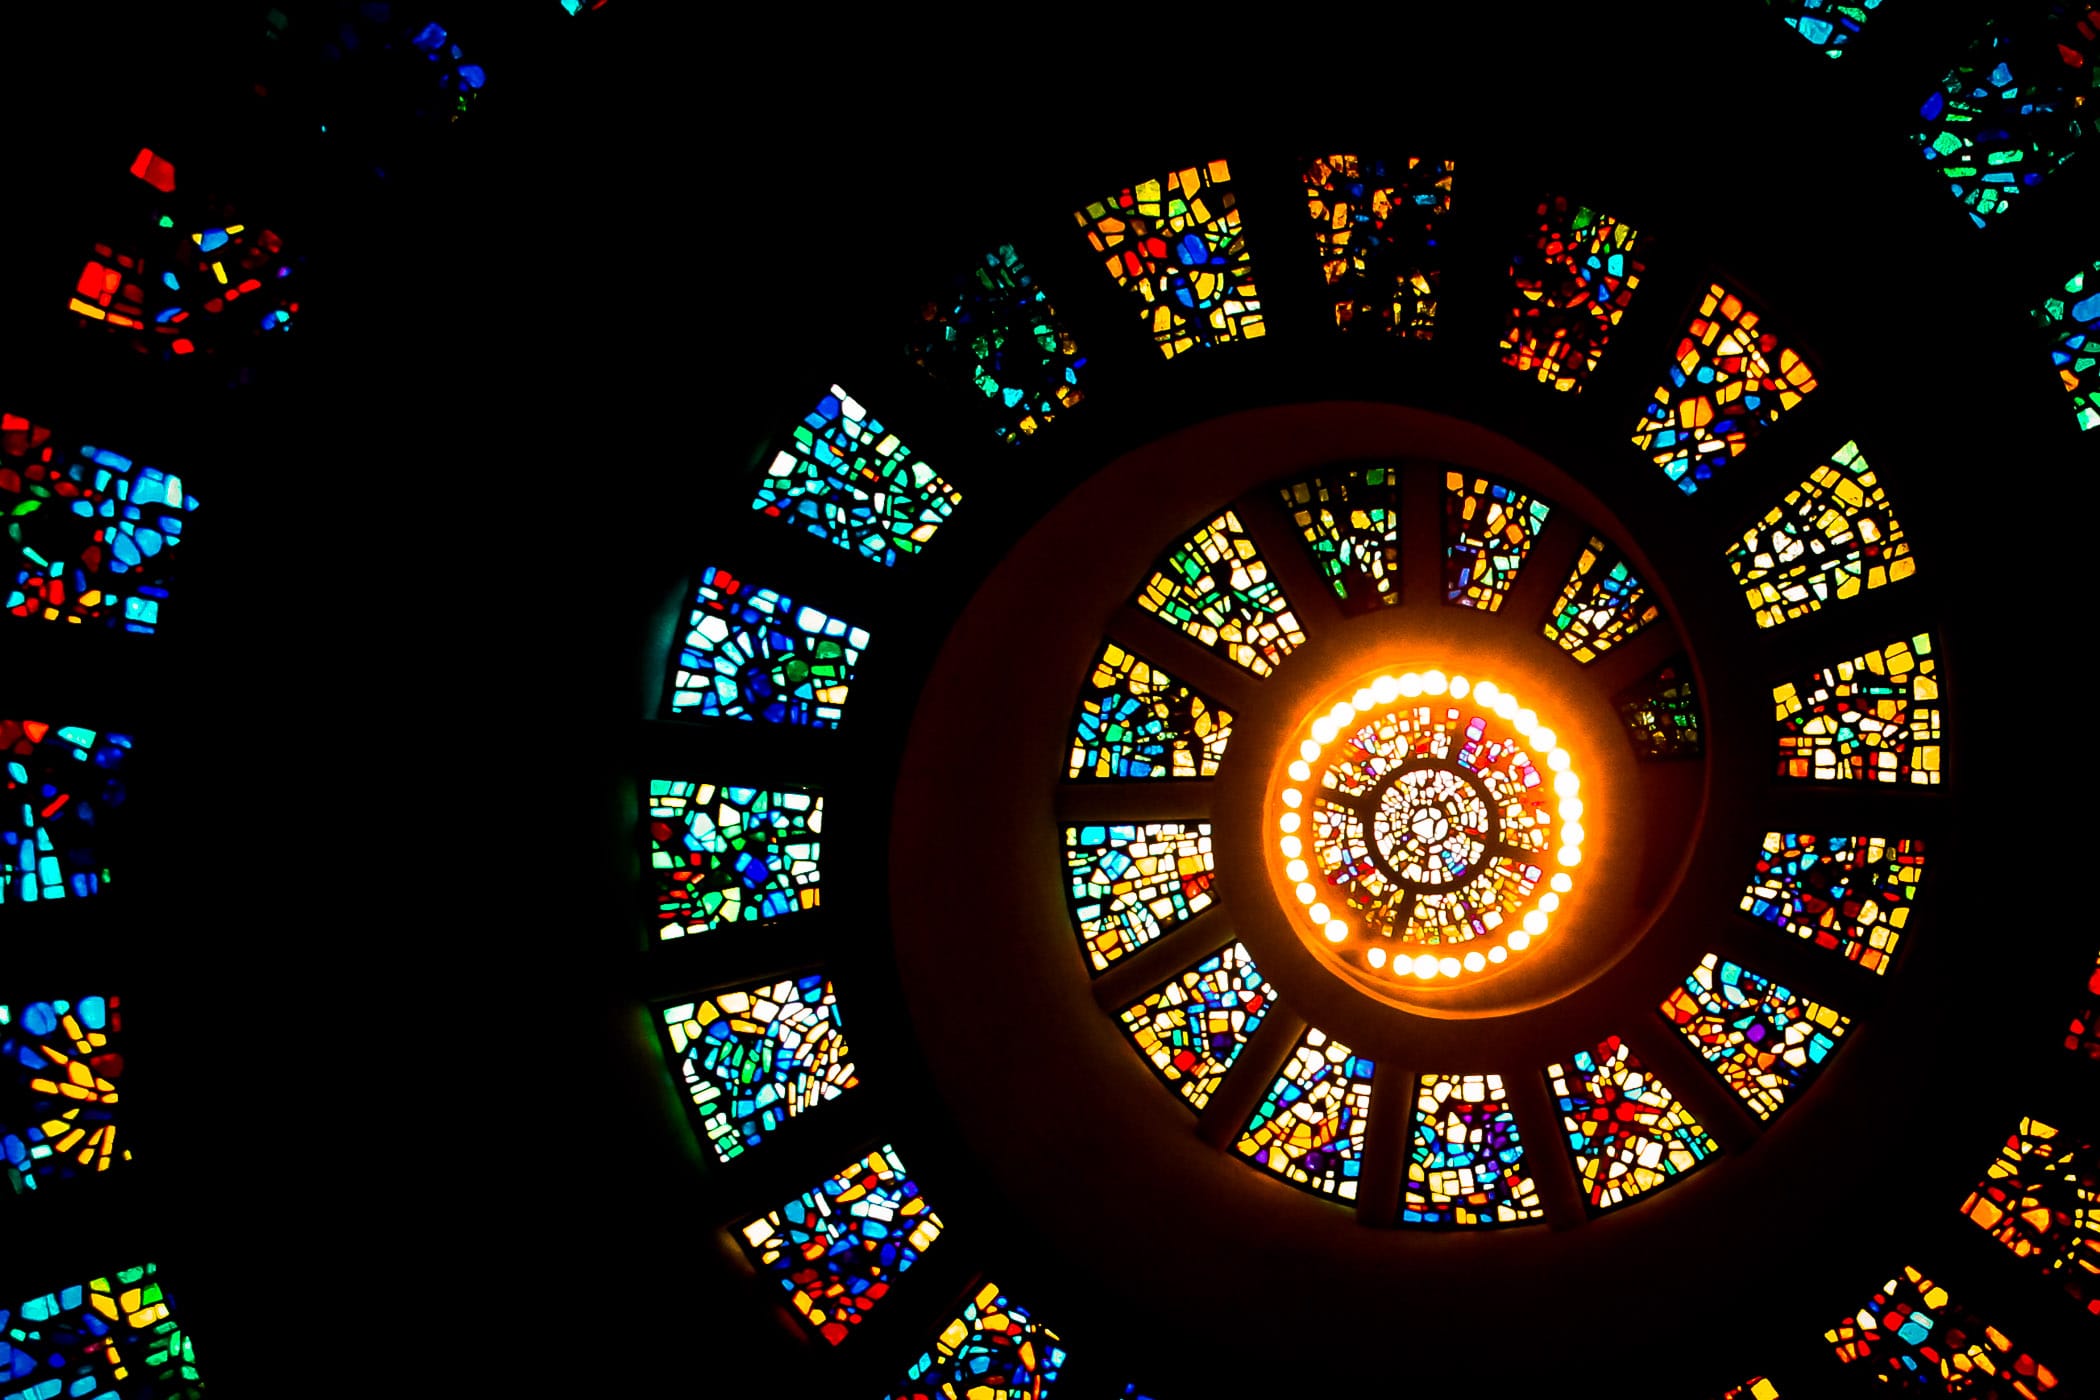 The stained-glass window on the ceiling of the chapel at Thanks-Giving Square in Downtown Dallas.